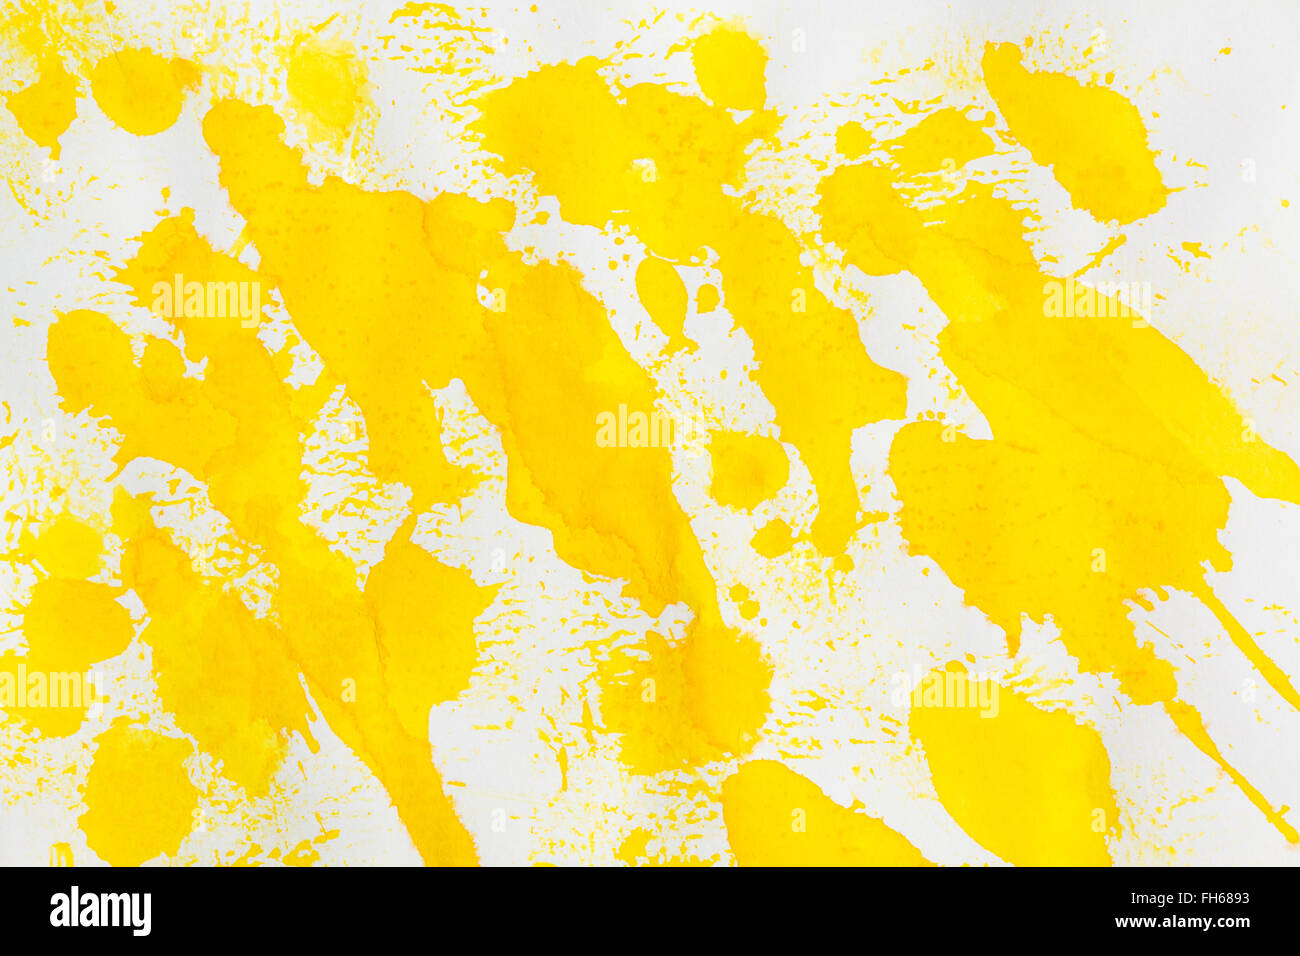 Watercolor yellow splashes abstract on white grainy paper. Design element. To use as background. Stock Photo